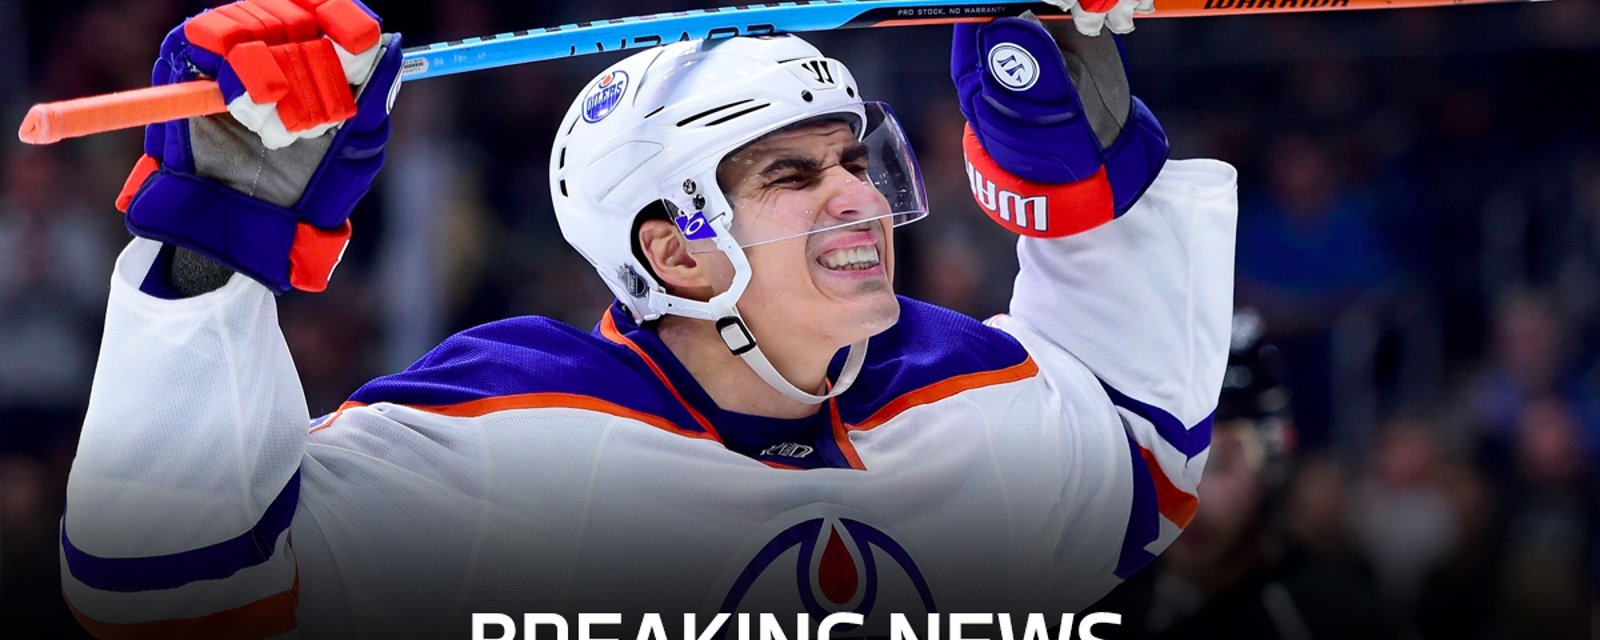 Nail Yakupov traded to his fourth team in the past year